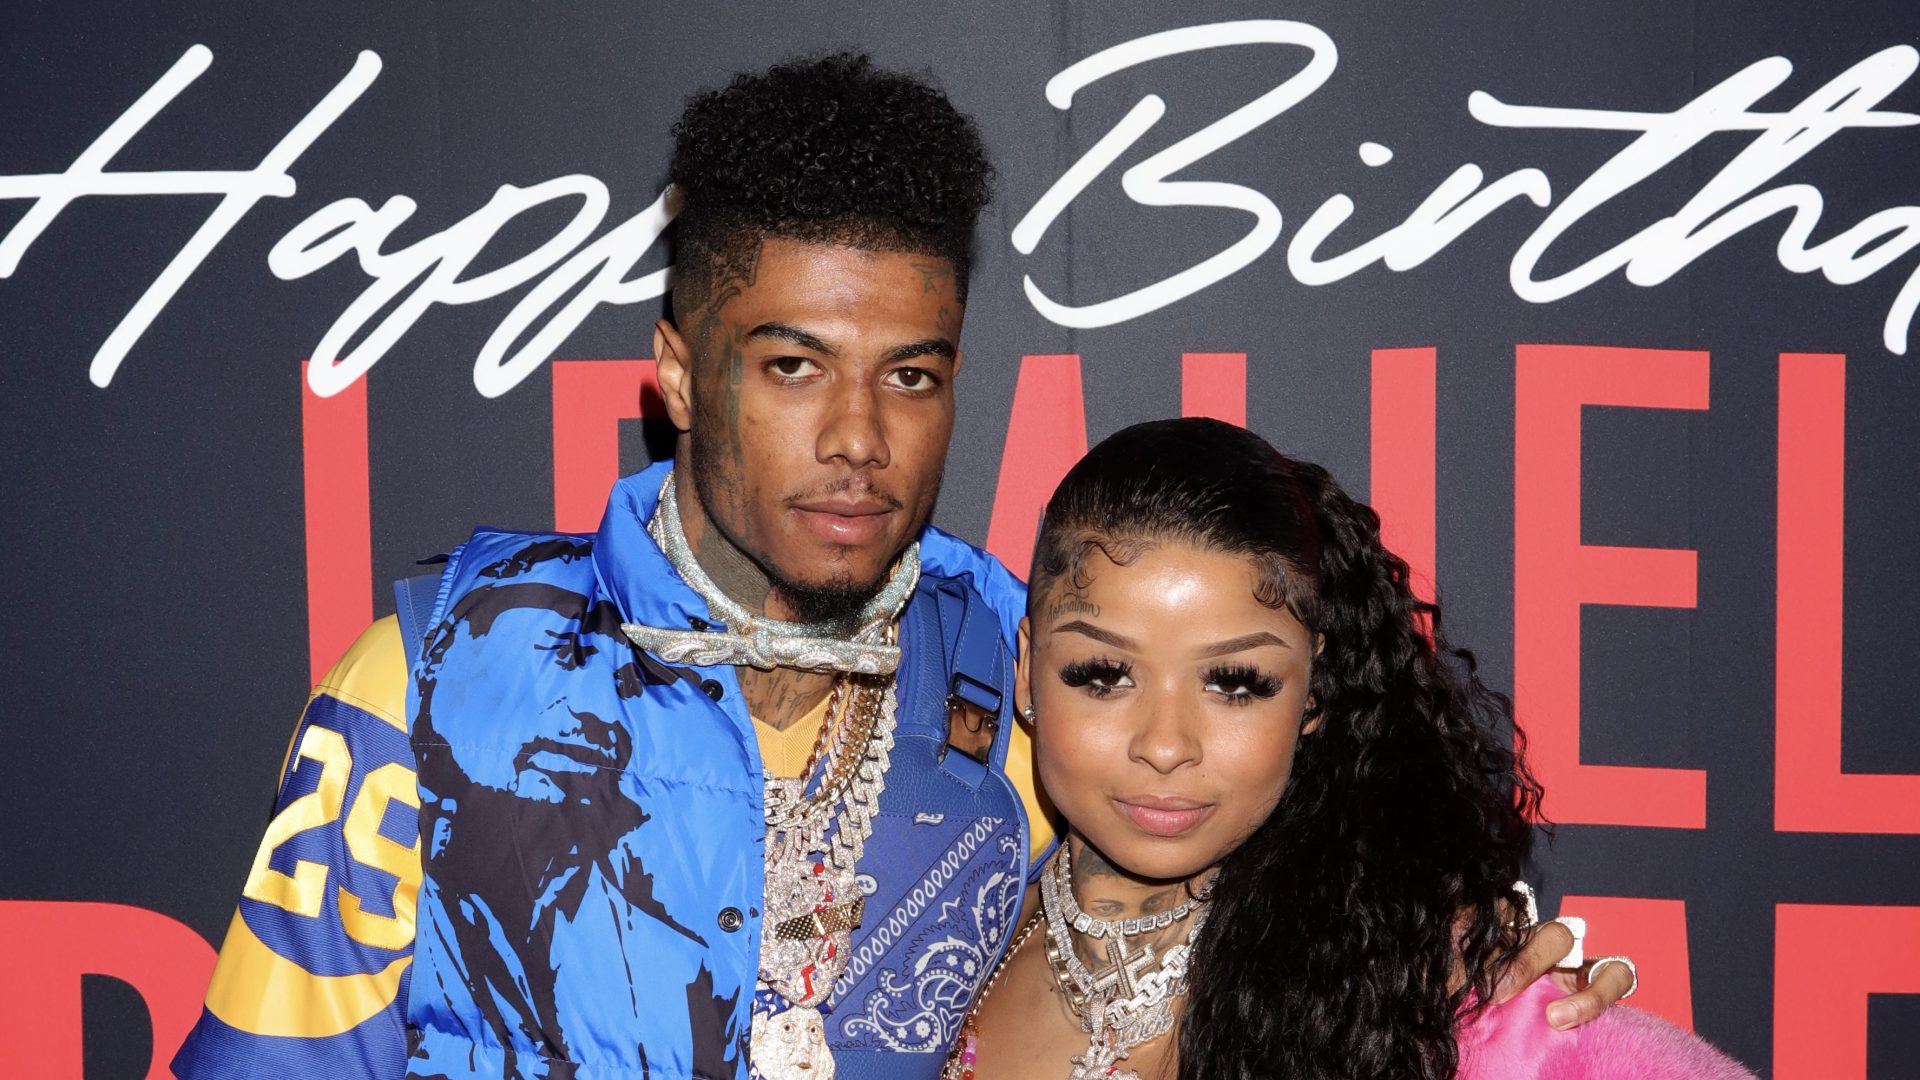 Social Media Reacts After Chrisean Rock & Chrisean Jr. Appear In Blueface’s Video ‘Baby Momma Drama’: ‘They Got Us Again’ thumbnail